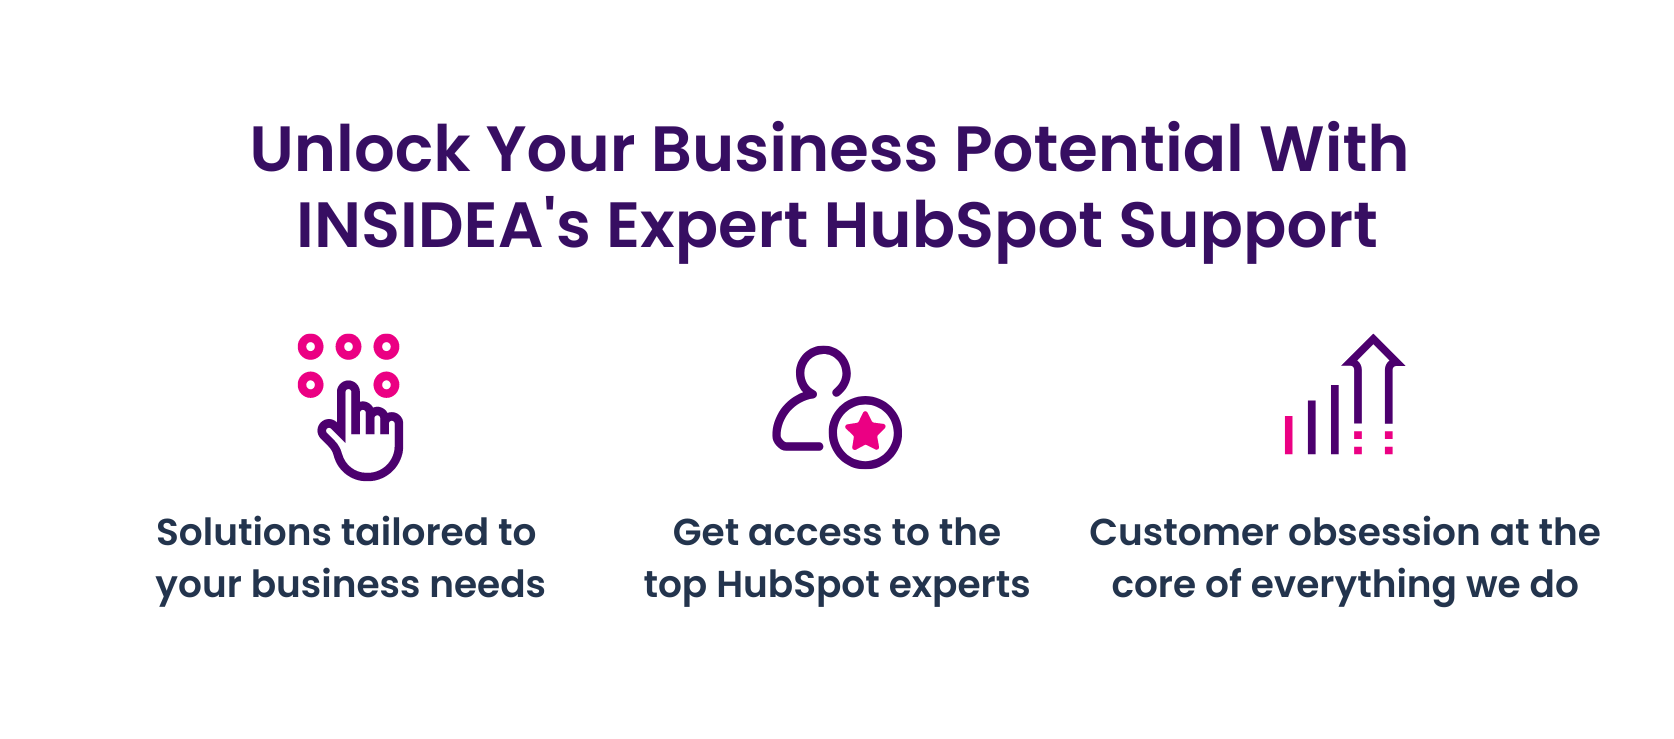 Unlock Your Business Potential with INSIDEA's HubSpot Support